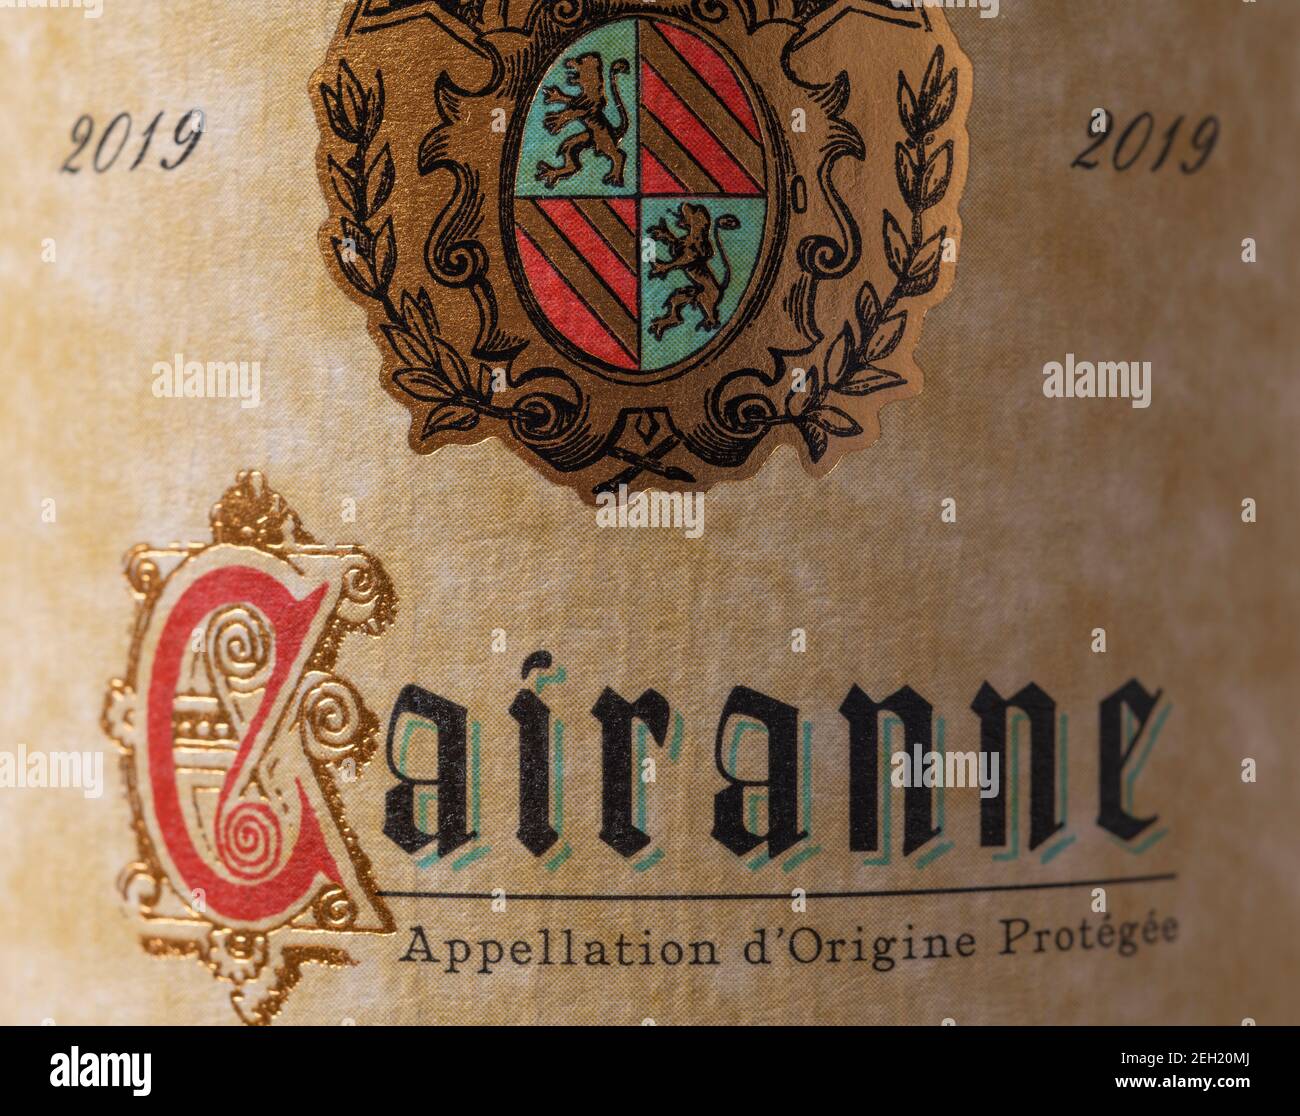 Cairanne 2019 French Southern Rhône valley wine bottle label closeup. Cairanne was given Cru status in 2016. Stock Photo